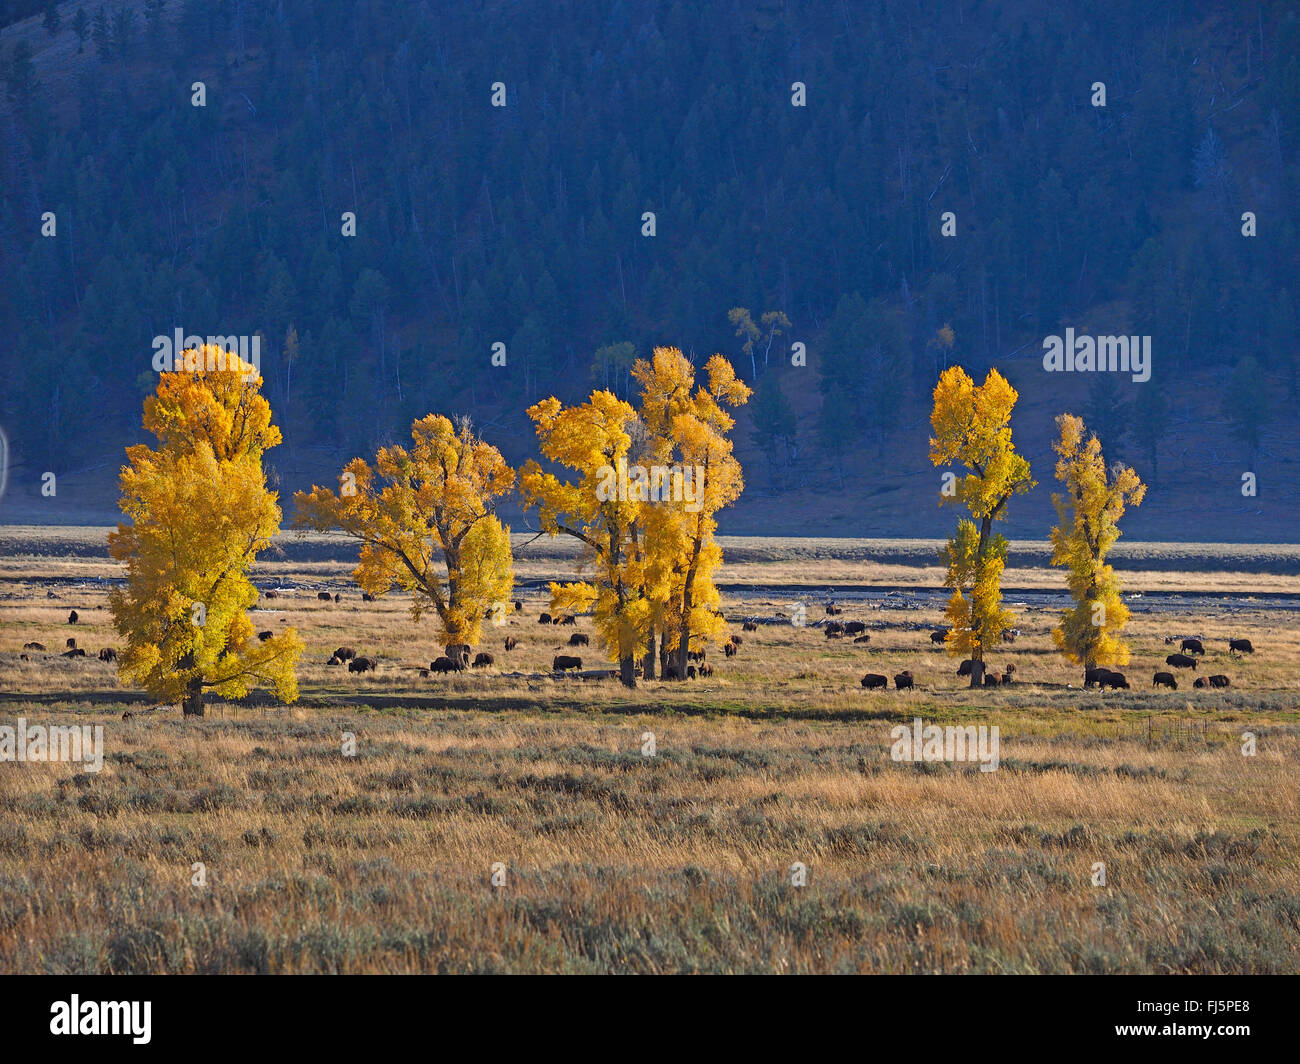 American bison, buffalo (Bison bison), herd of buffalos in Lamar Valley, USA, Wyoming, Yellowstone National Park Stock Photo